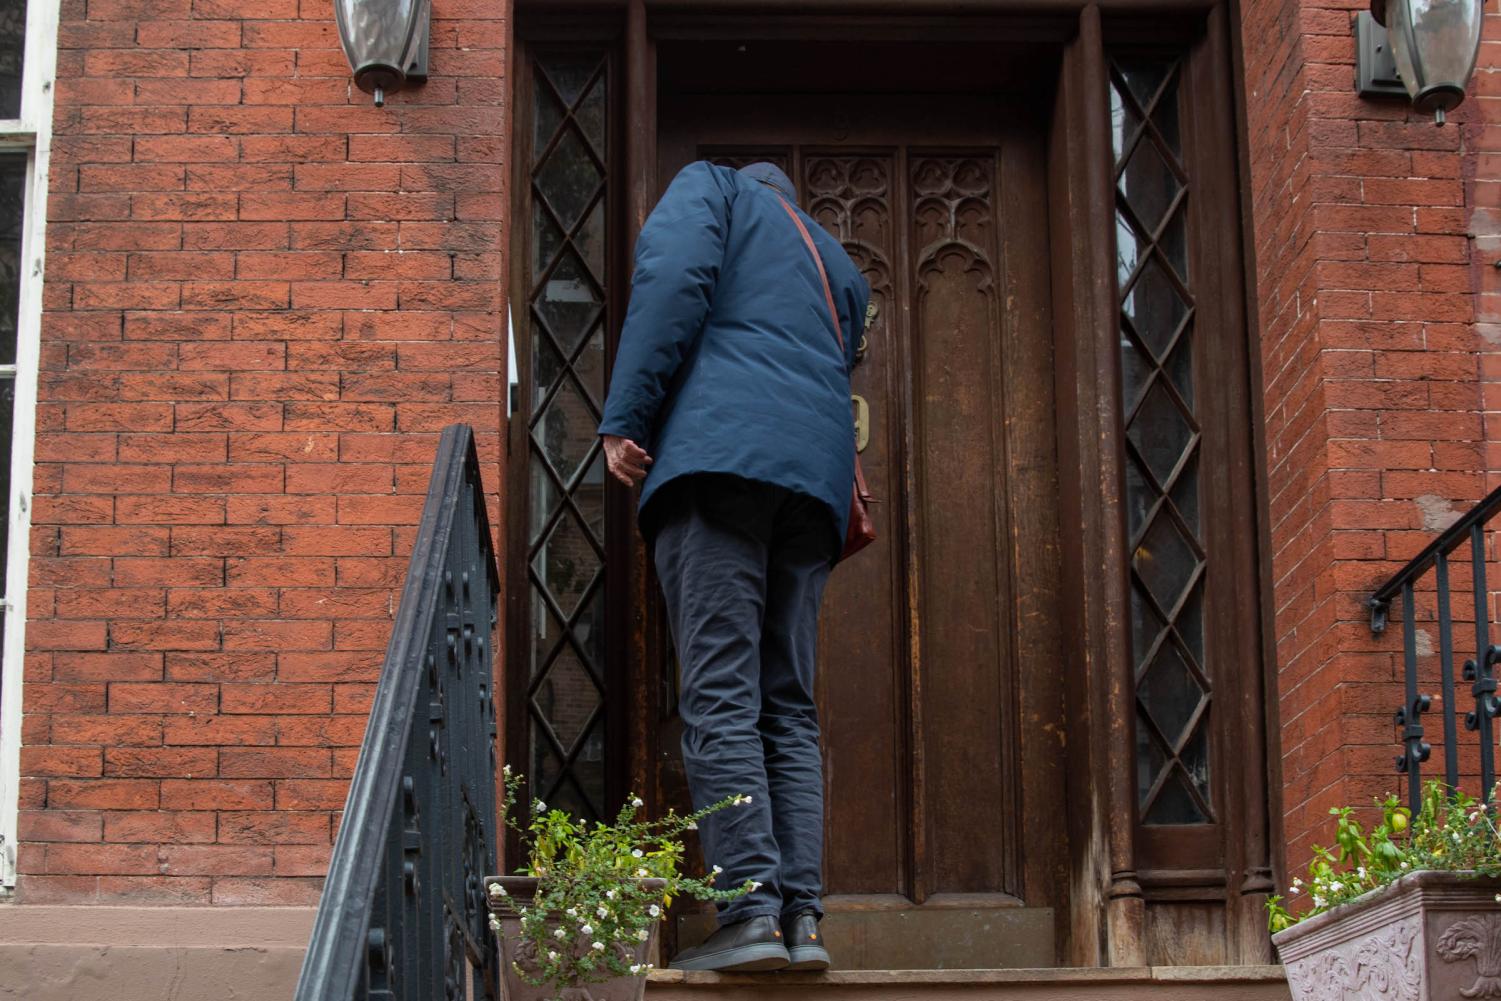 Alan Grossman opens the door to his brownstone apartment while wearing a brown satchel and a navy blue jacket. There are potted flowers on the stairs leading to the door.